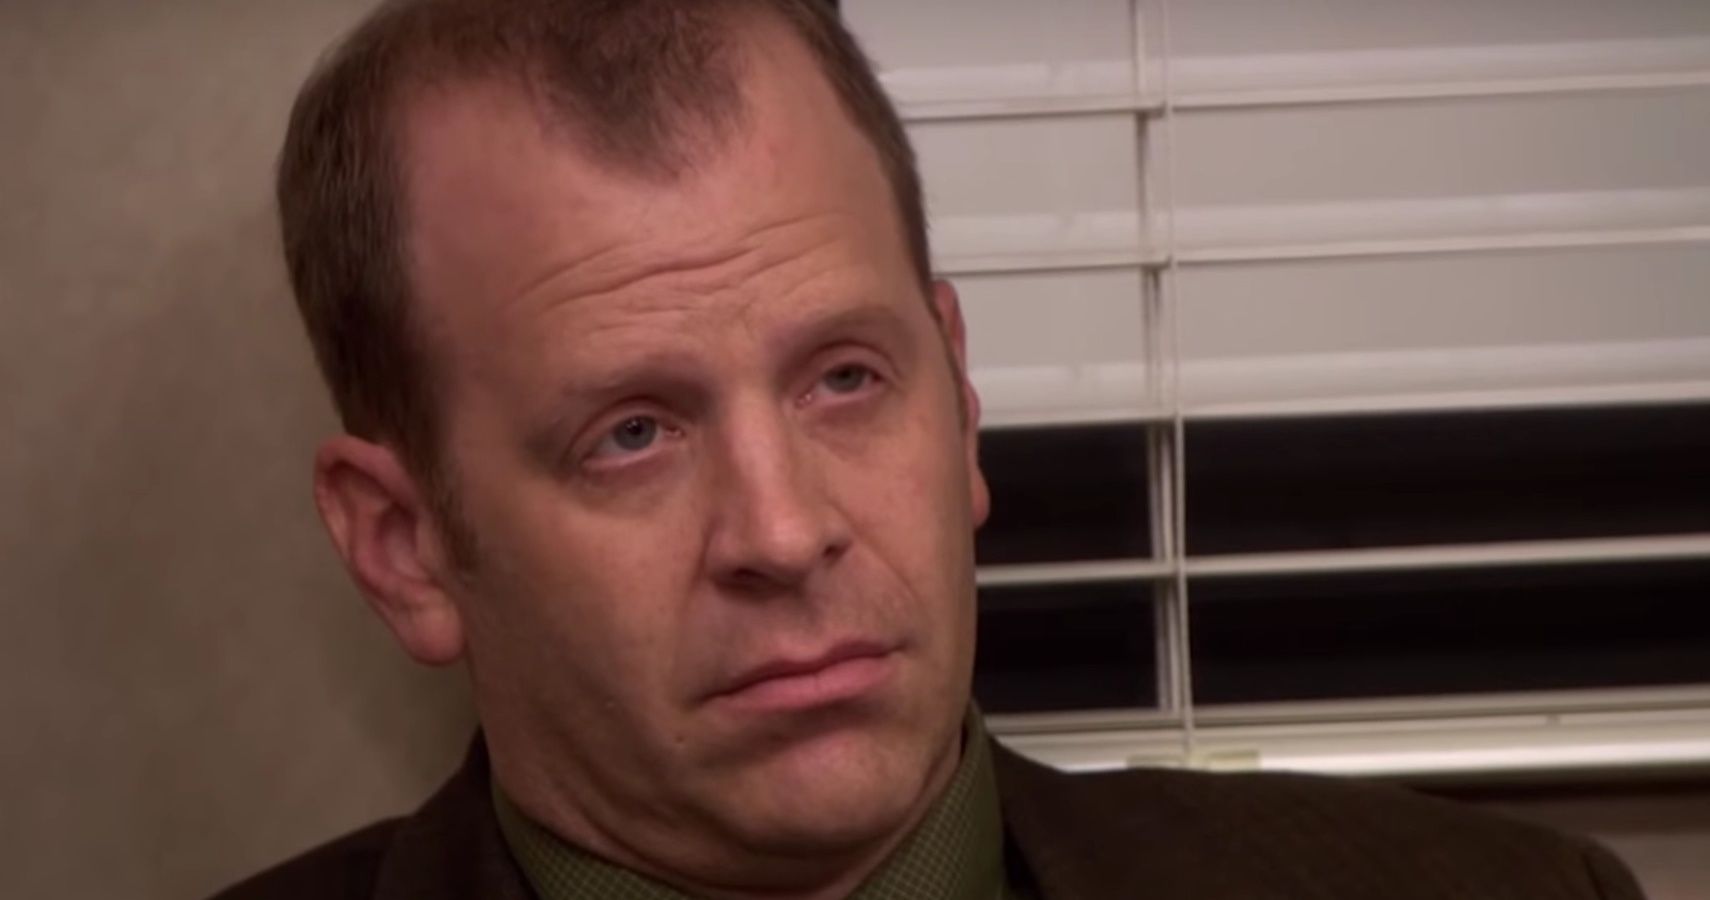 The-Office-Toby-Flenderson-featured.jpg